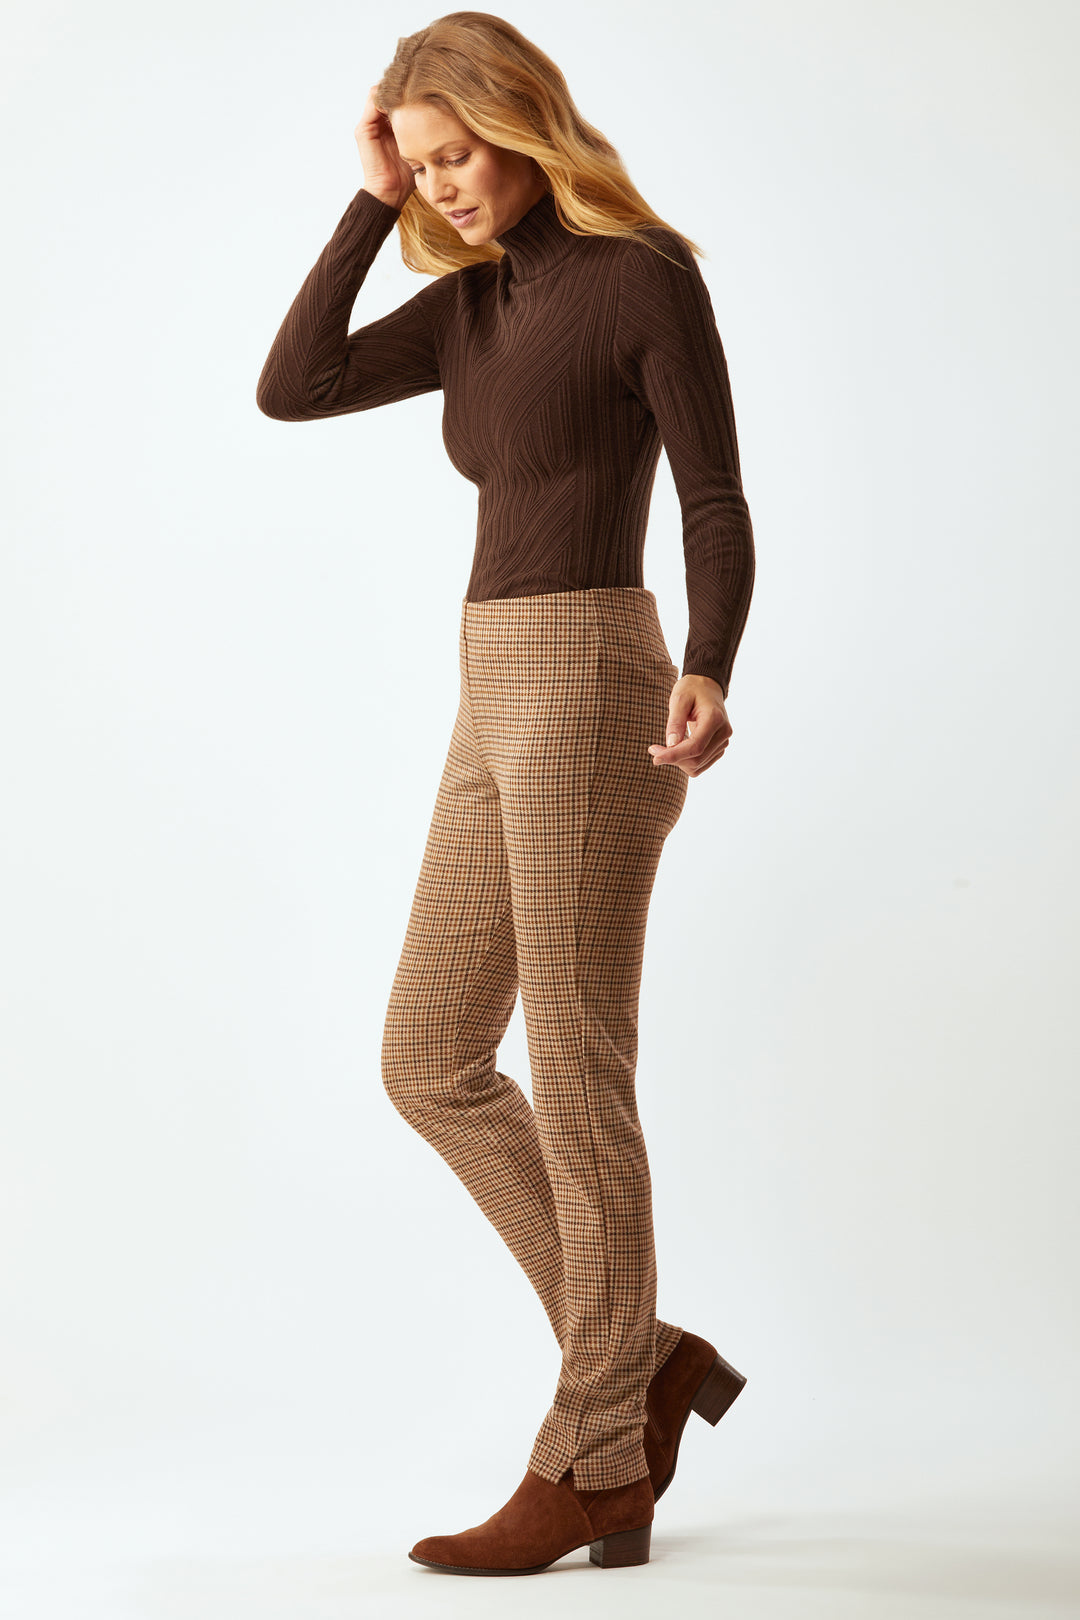 Springfield Classic Pull-On In Park Avenue Stretch - Autumn Check